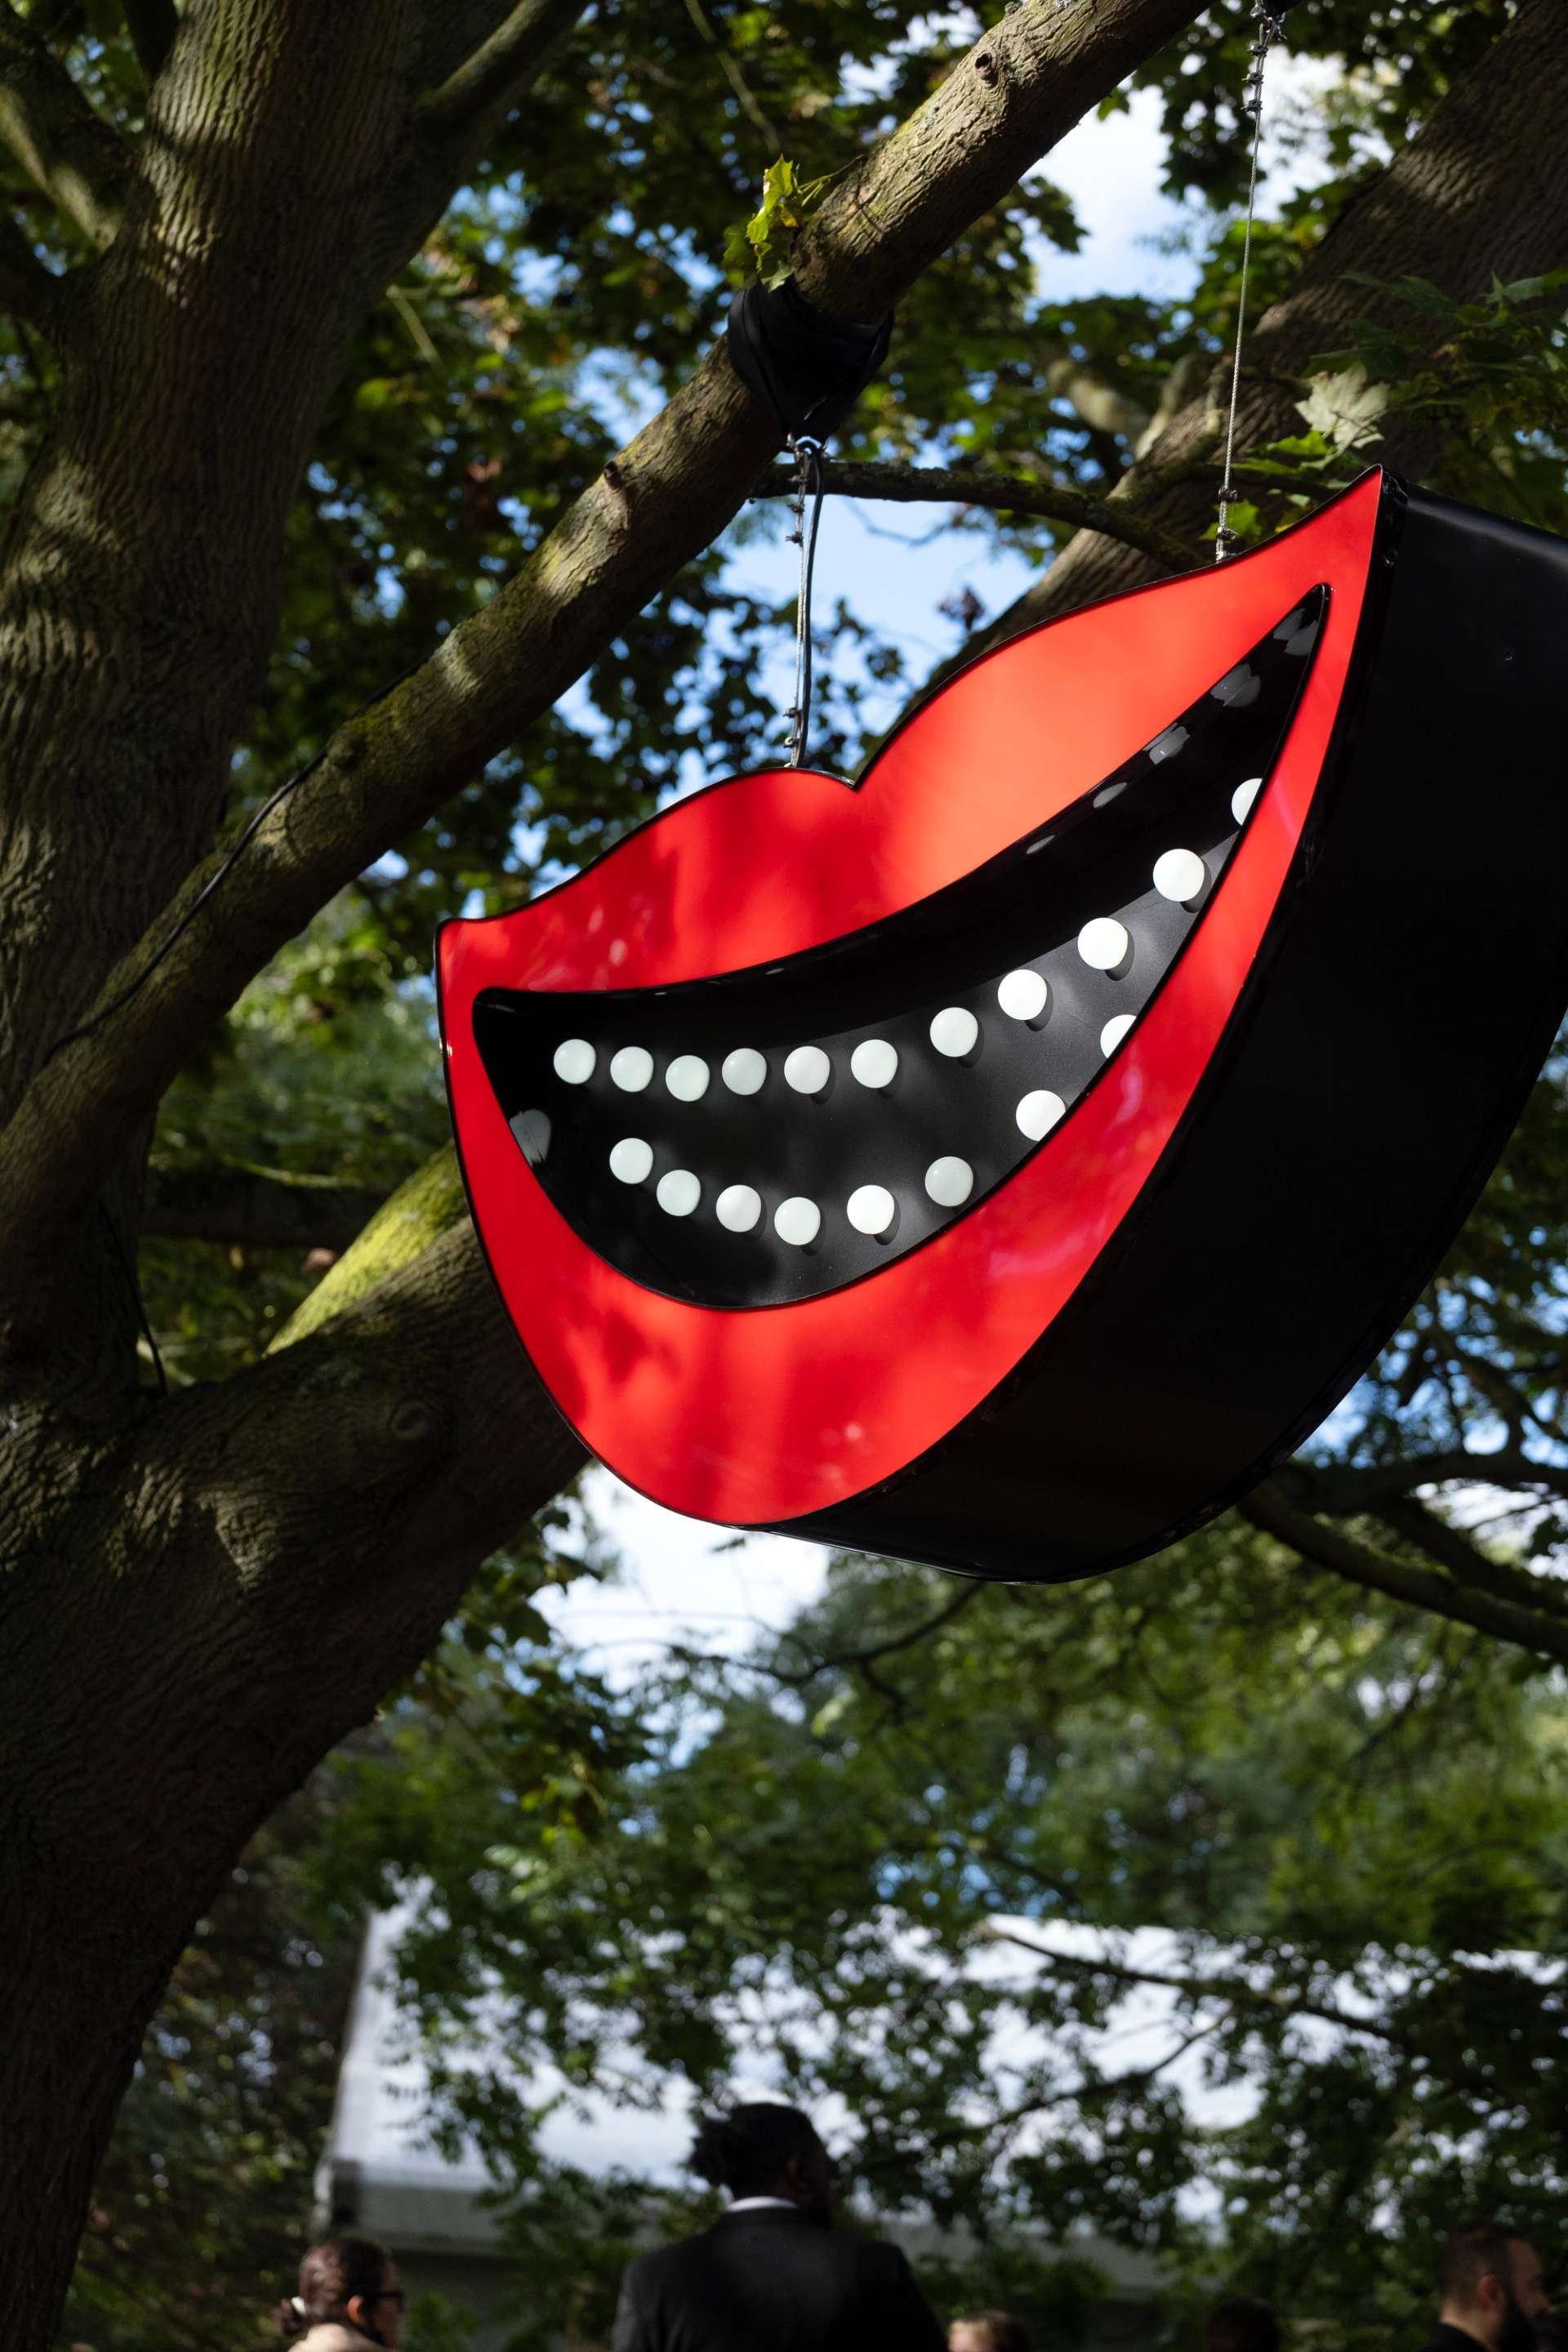 Large-scale artwork: Smiling mouth with white lights as teeth, installed in a tree at Frieze Art Fair, London 2023.